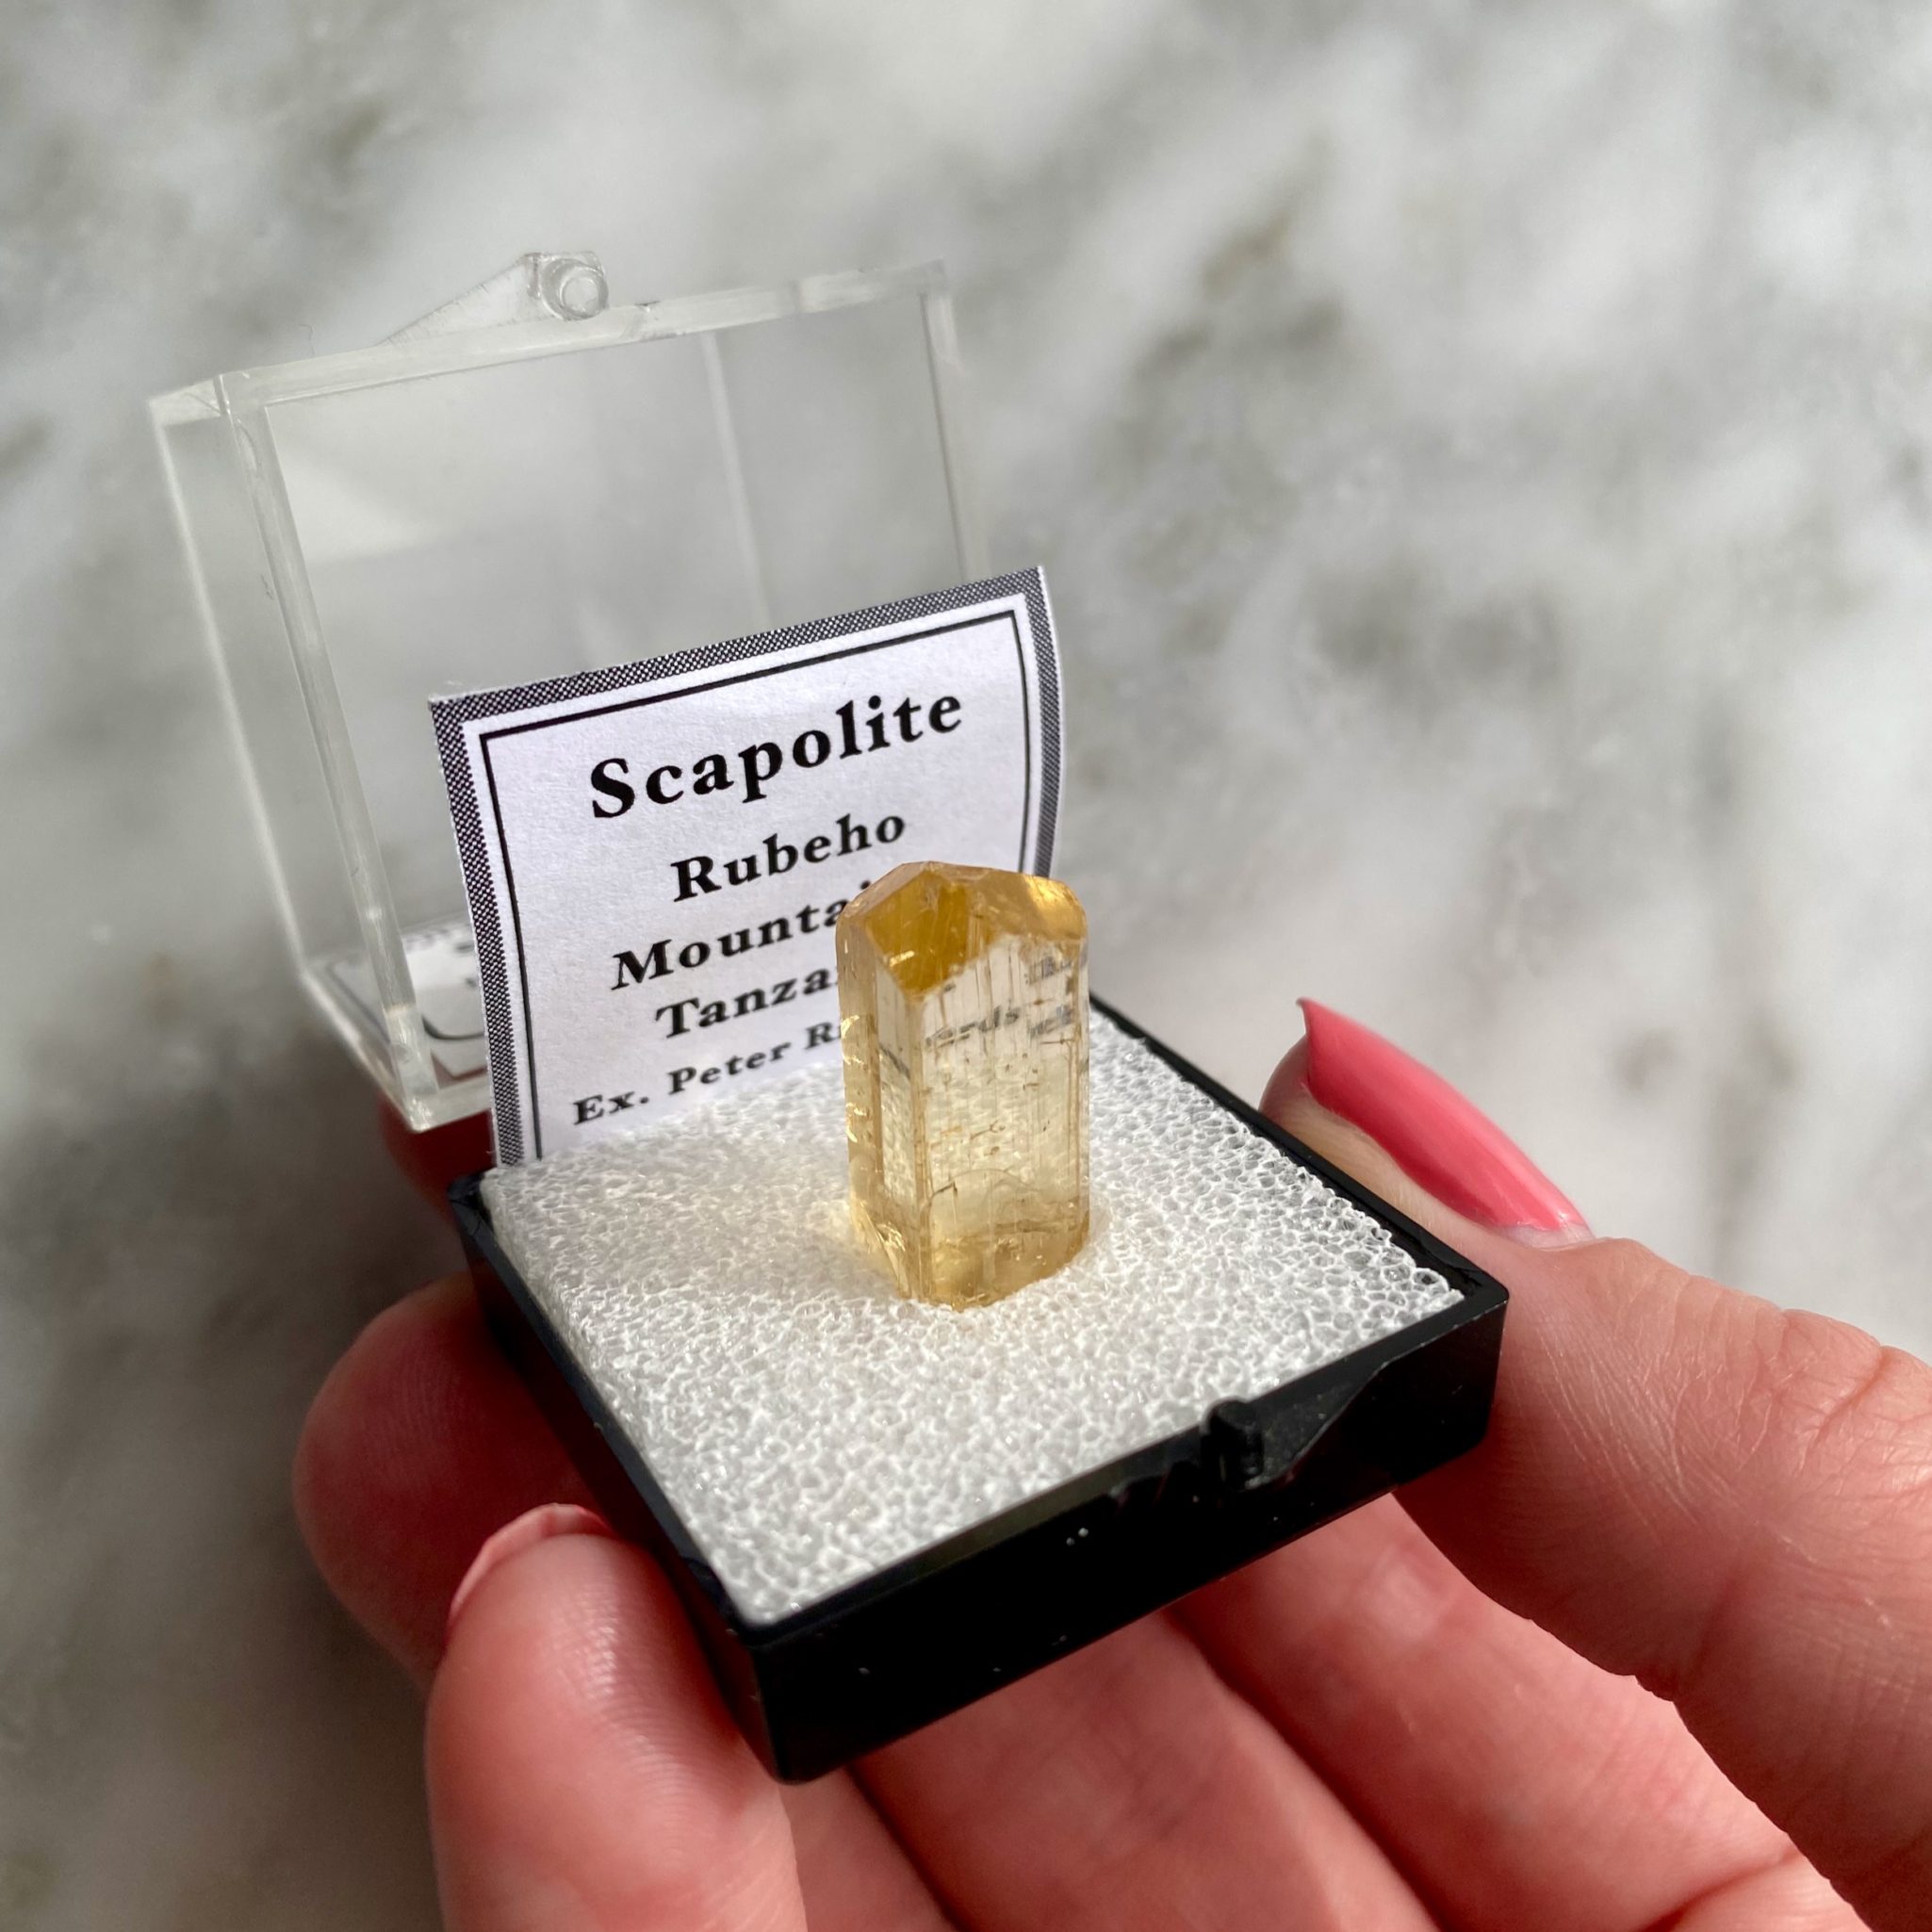 Scapolite Crystal from Rubeho Mountain Tanzania - crystal de scapolite du mont rubeho tanzanie